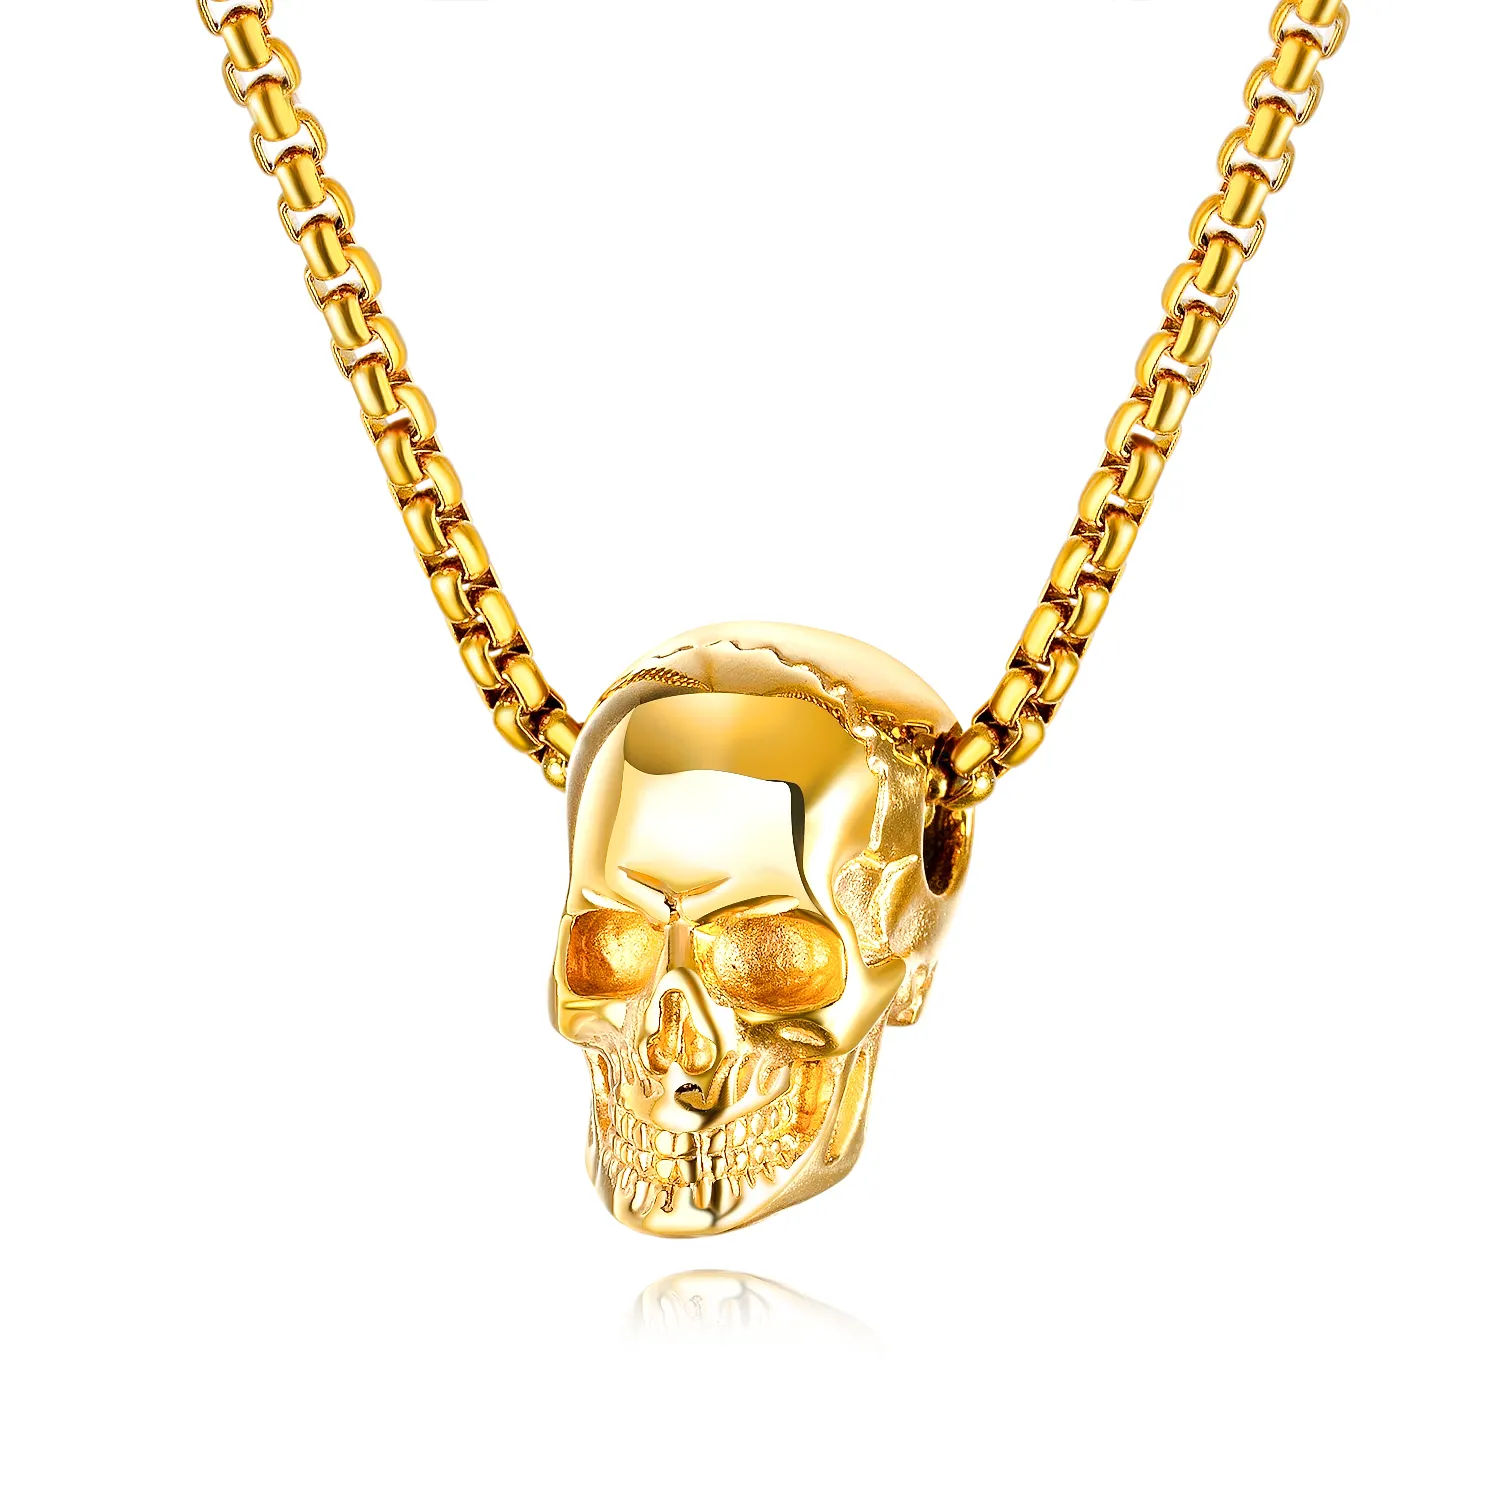 Fashion Stainless Steel Jewelry Necklace Halloween Gifts Mens Skull Head Pendant Necklace for Guys